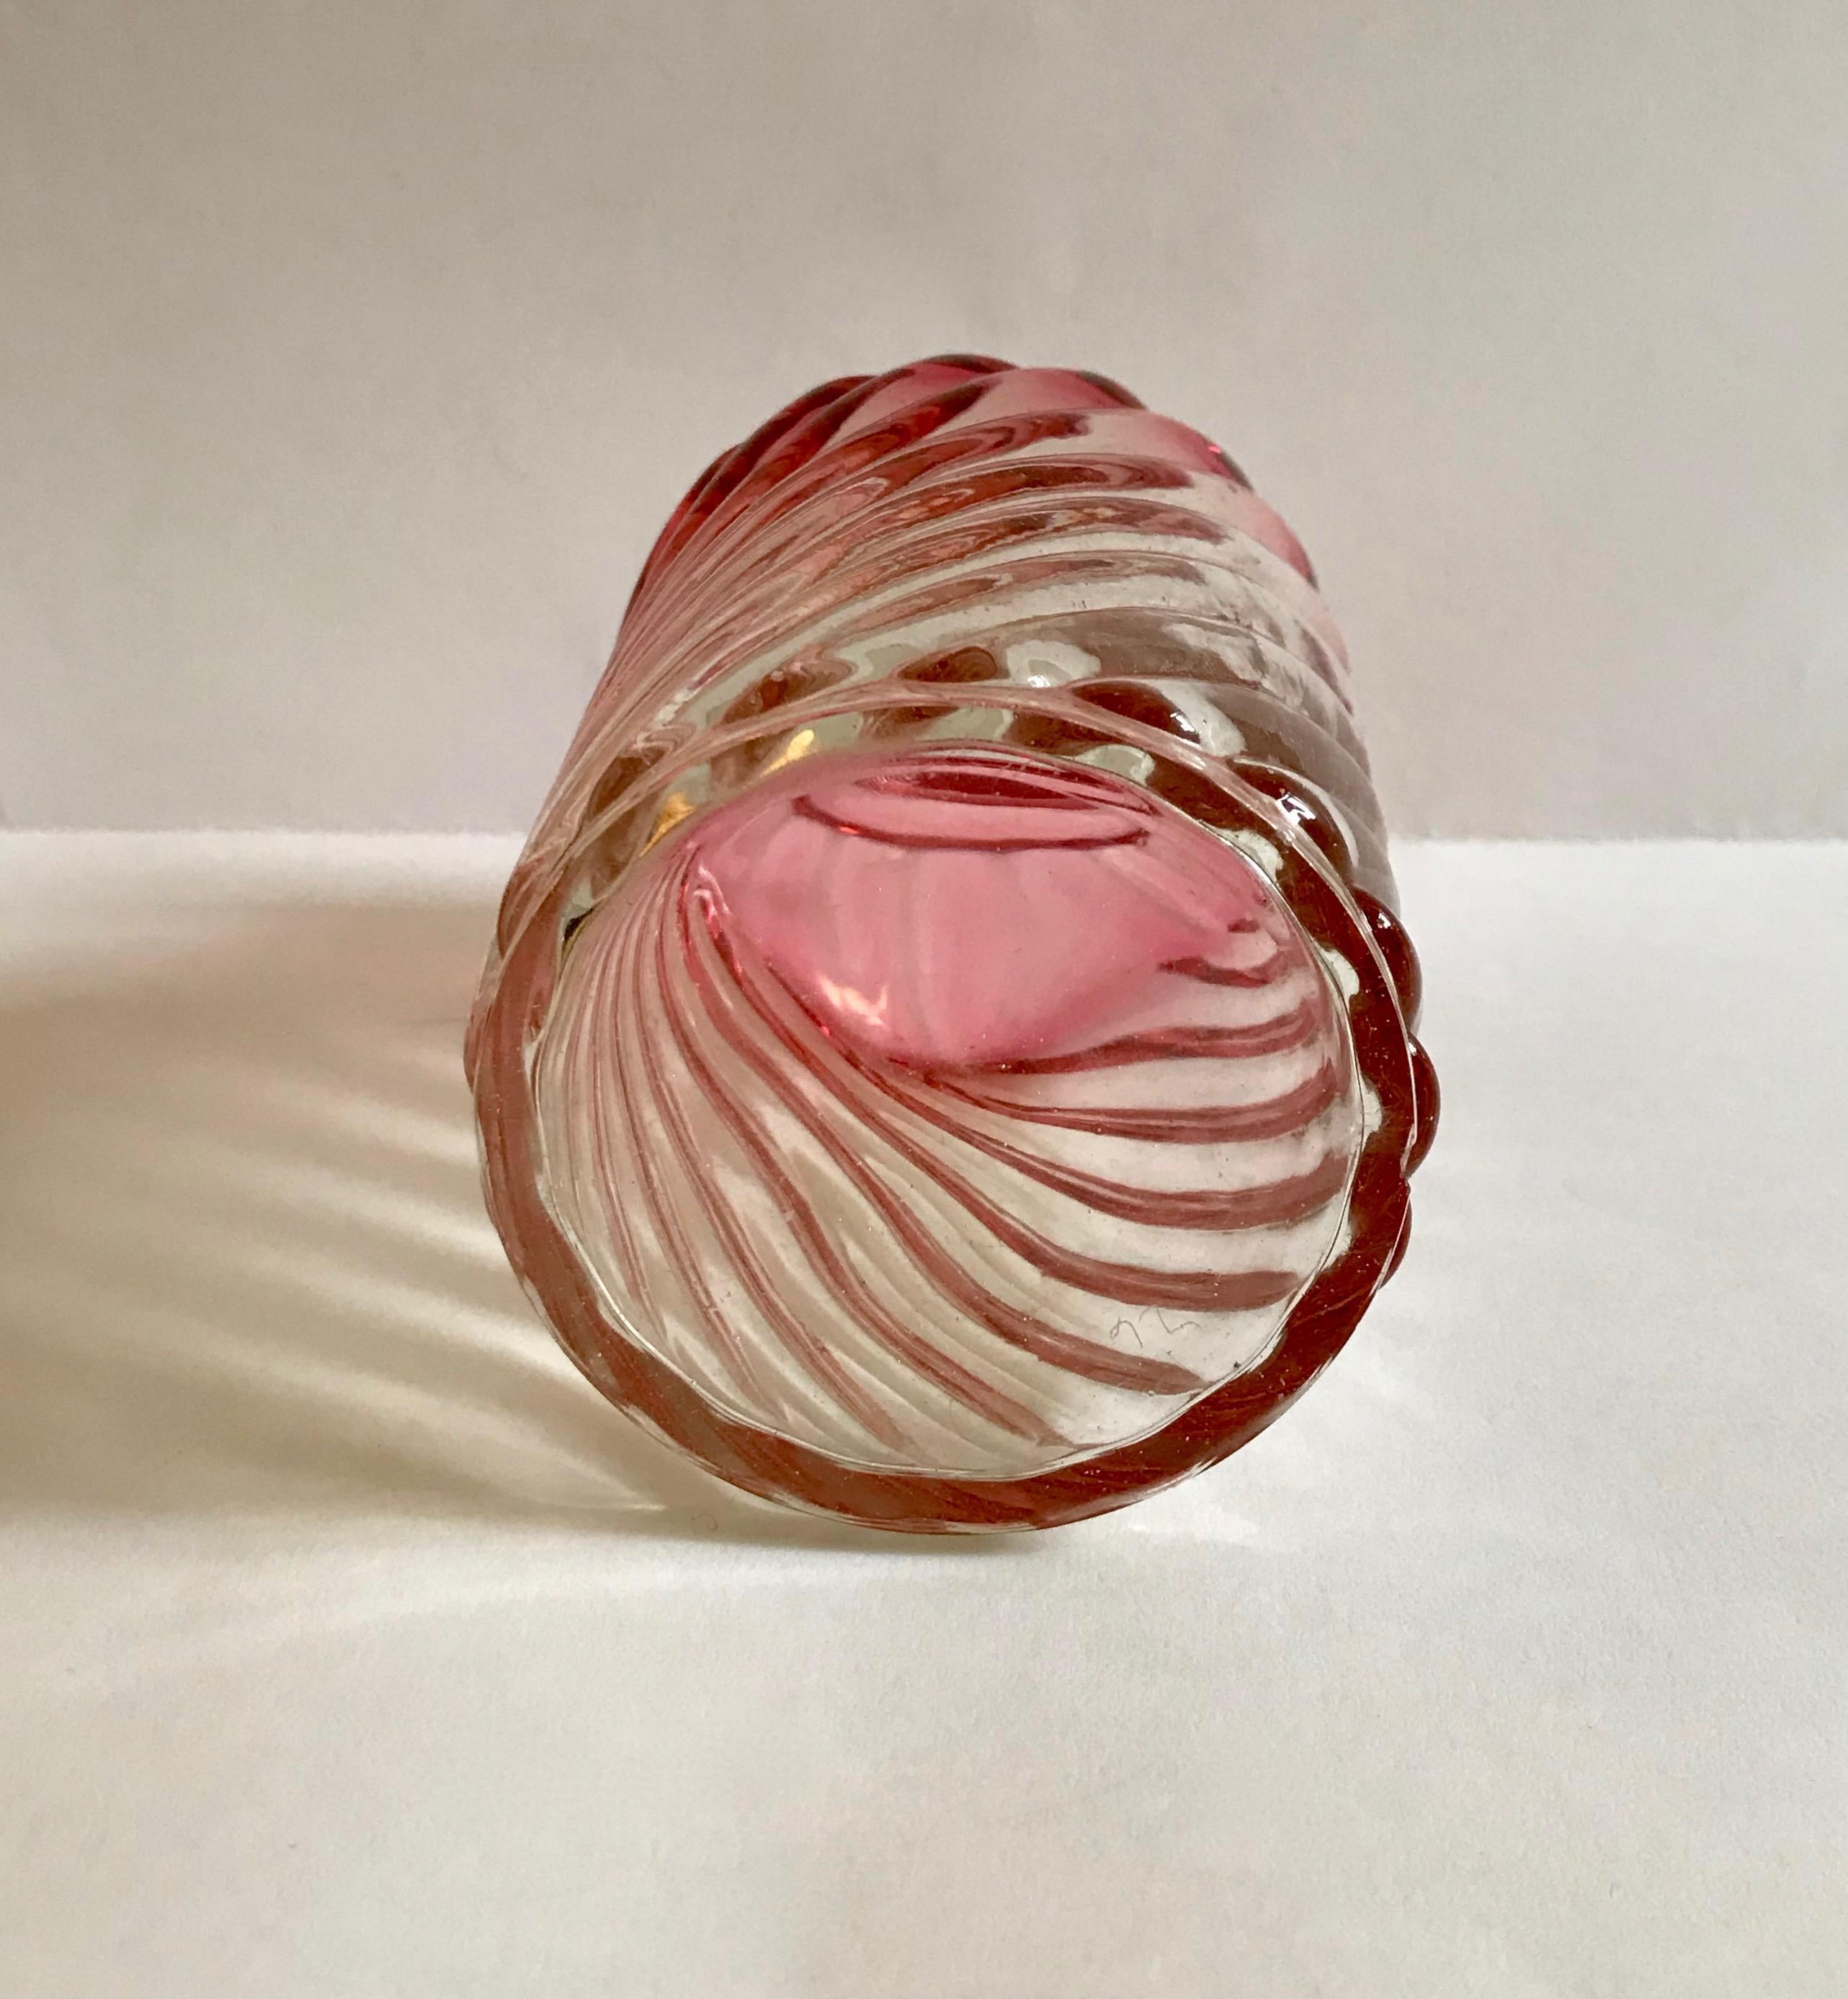 Large French Antique Crystal Bamboo Swirl Perfume Bottle By Baccarat  For Sale 2